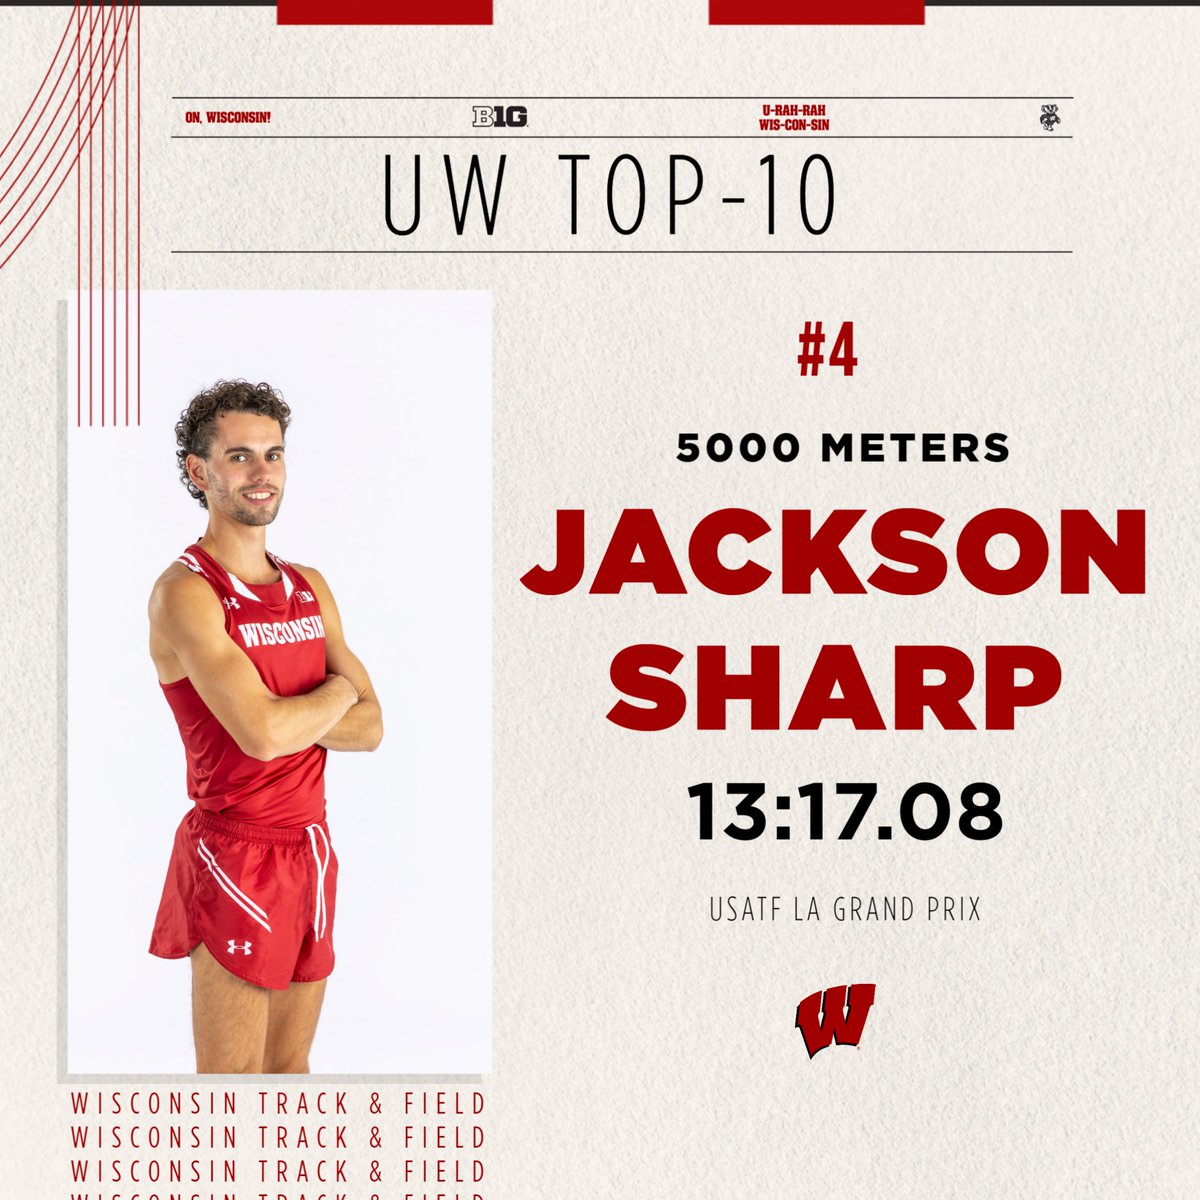 The record books have been rewritten tonight! #Badgers Bob Liking clocks the school's fastest-ever time in the 5000 meters of 13:09.31 while Jackson Sharp checks in at No. 4 on the program's all-time list with a time of 13:17.08